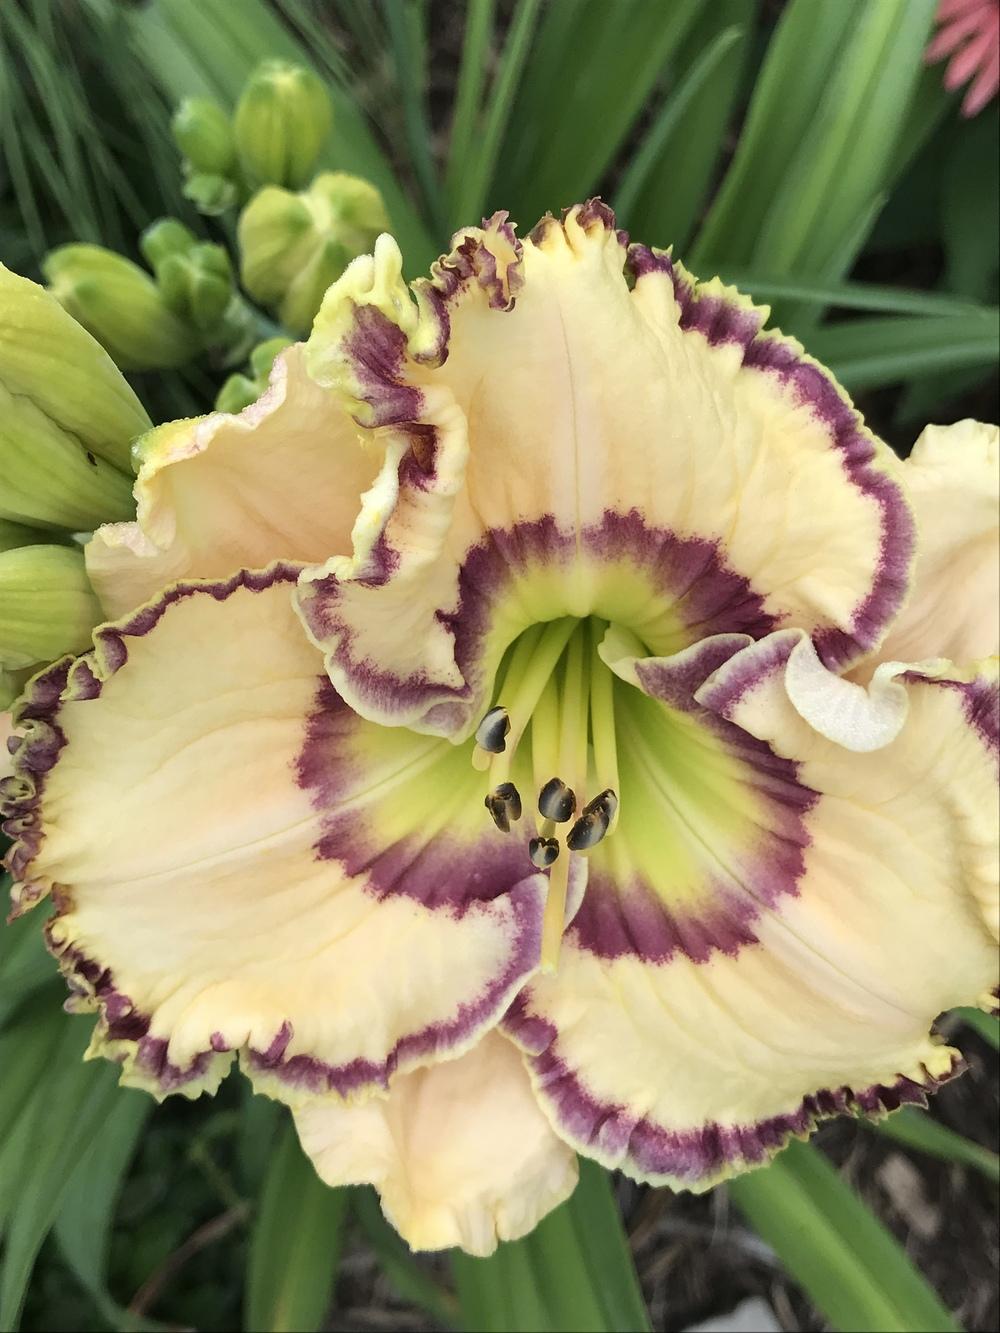 Photo of Daylily (Hemerocallis 'Keep on Looking') uploaded by Legalily